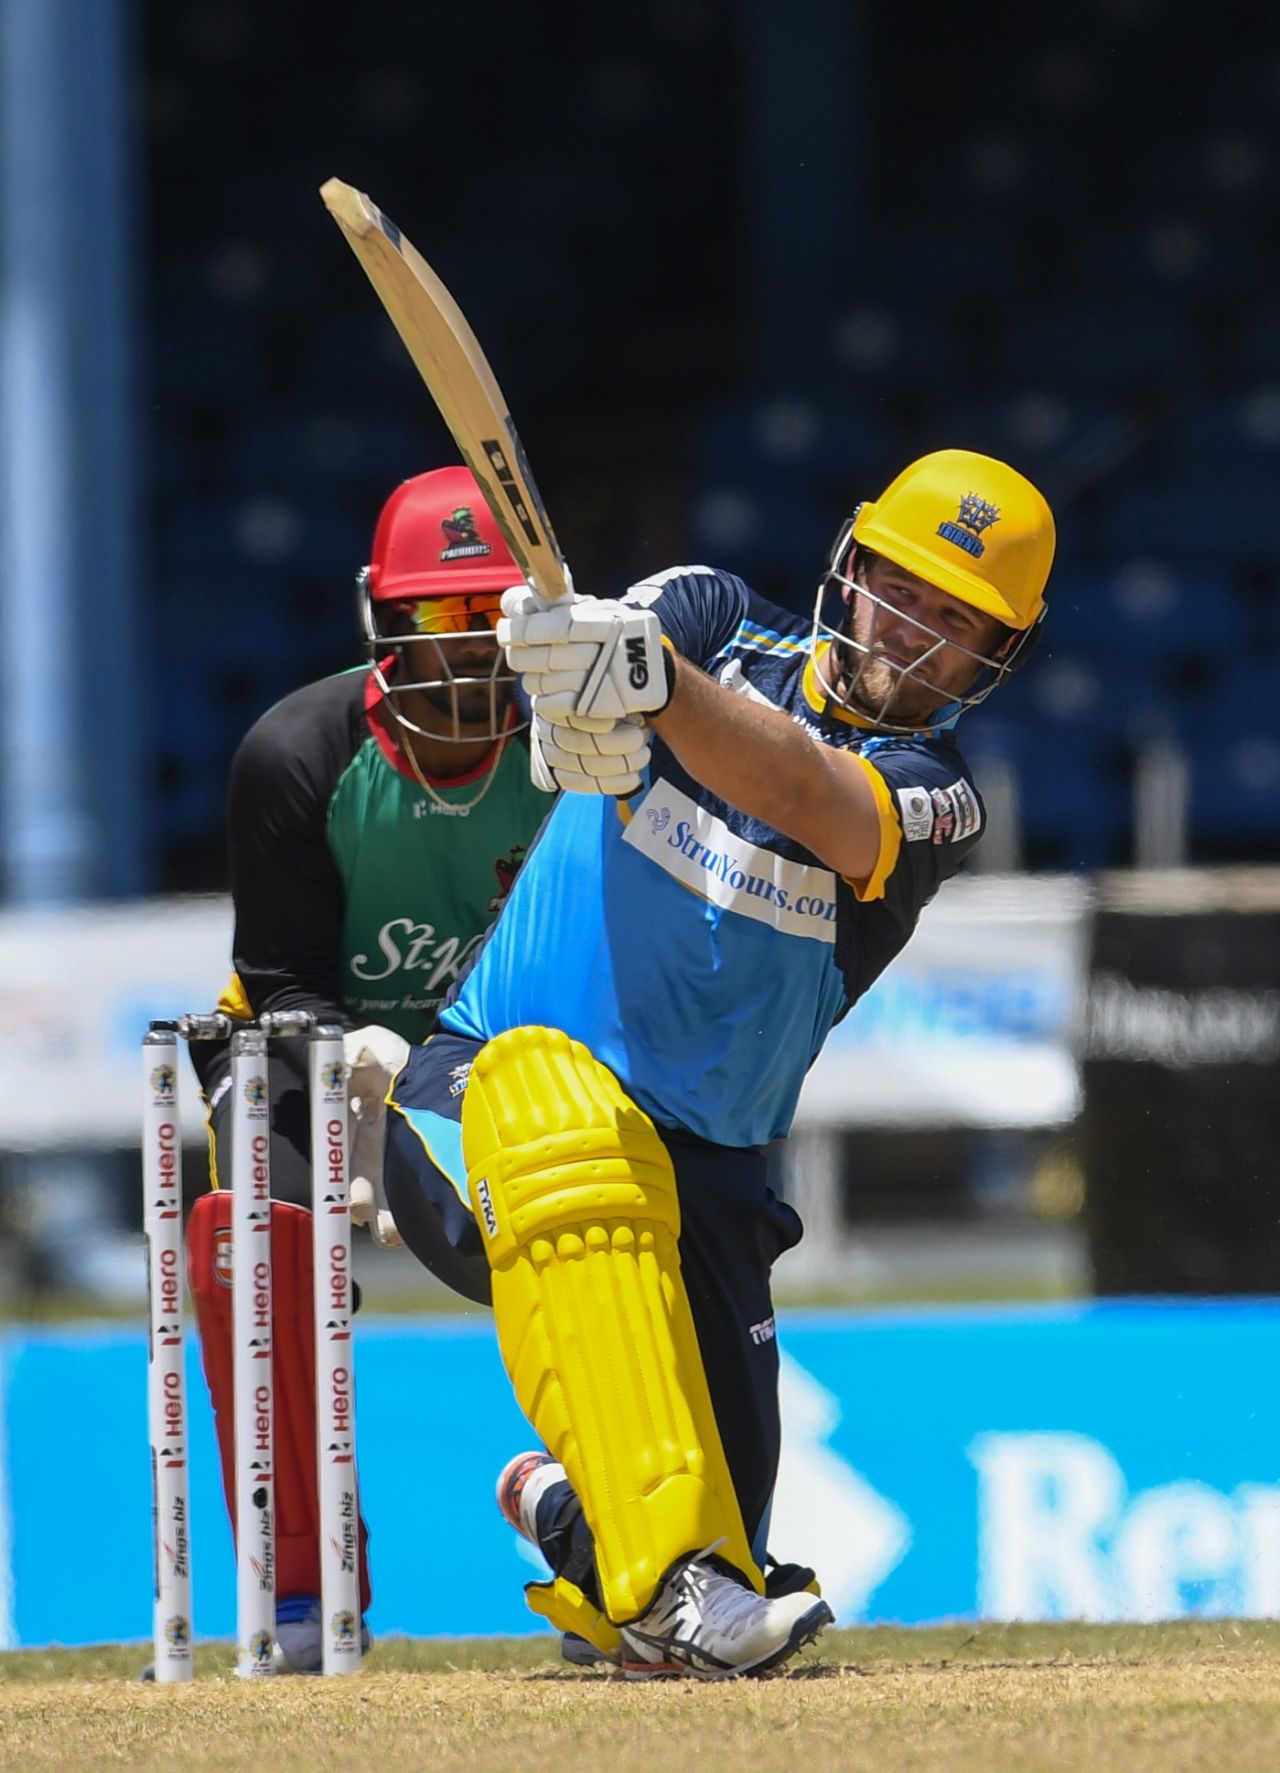 Corey Anderson rolls out a slog-sweep, Barbados Tridents v St Kitts & Nevis Patriots, Queen's Park Oval, CPL 2020, August 25, 2020